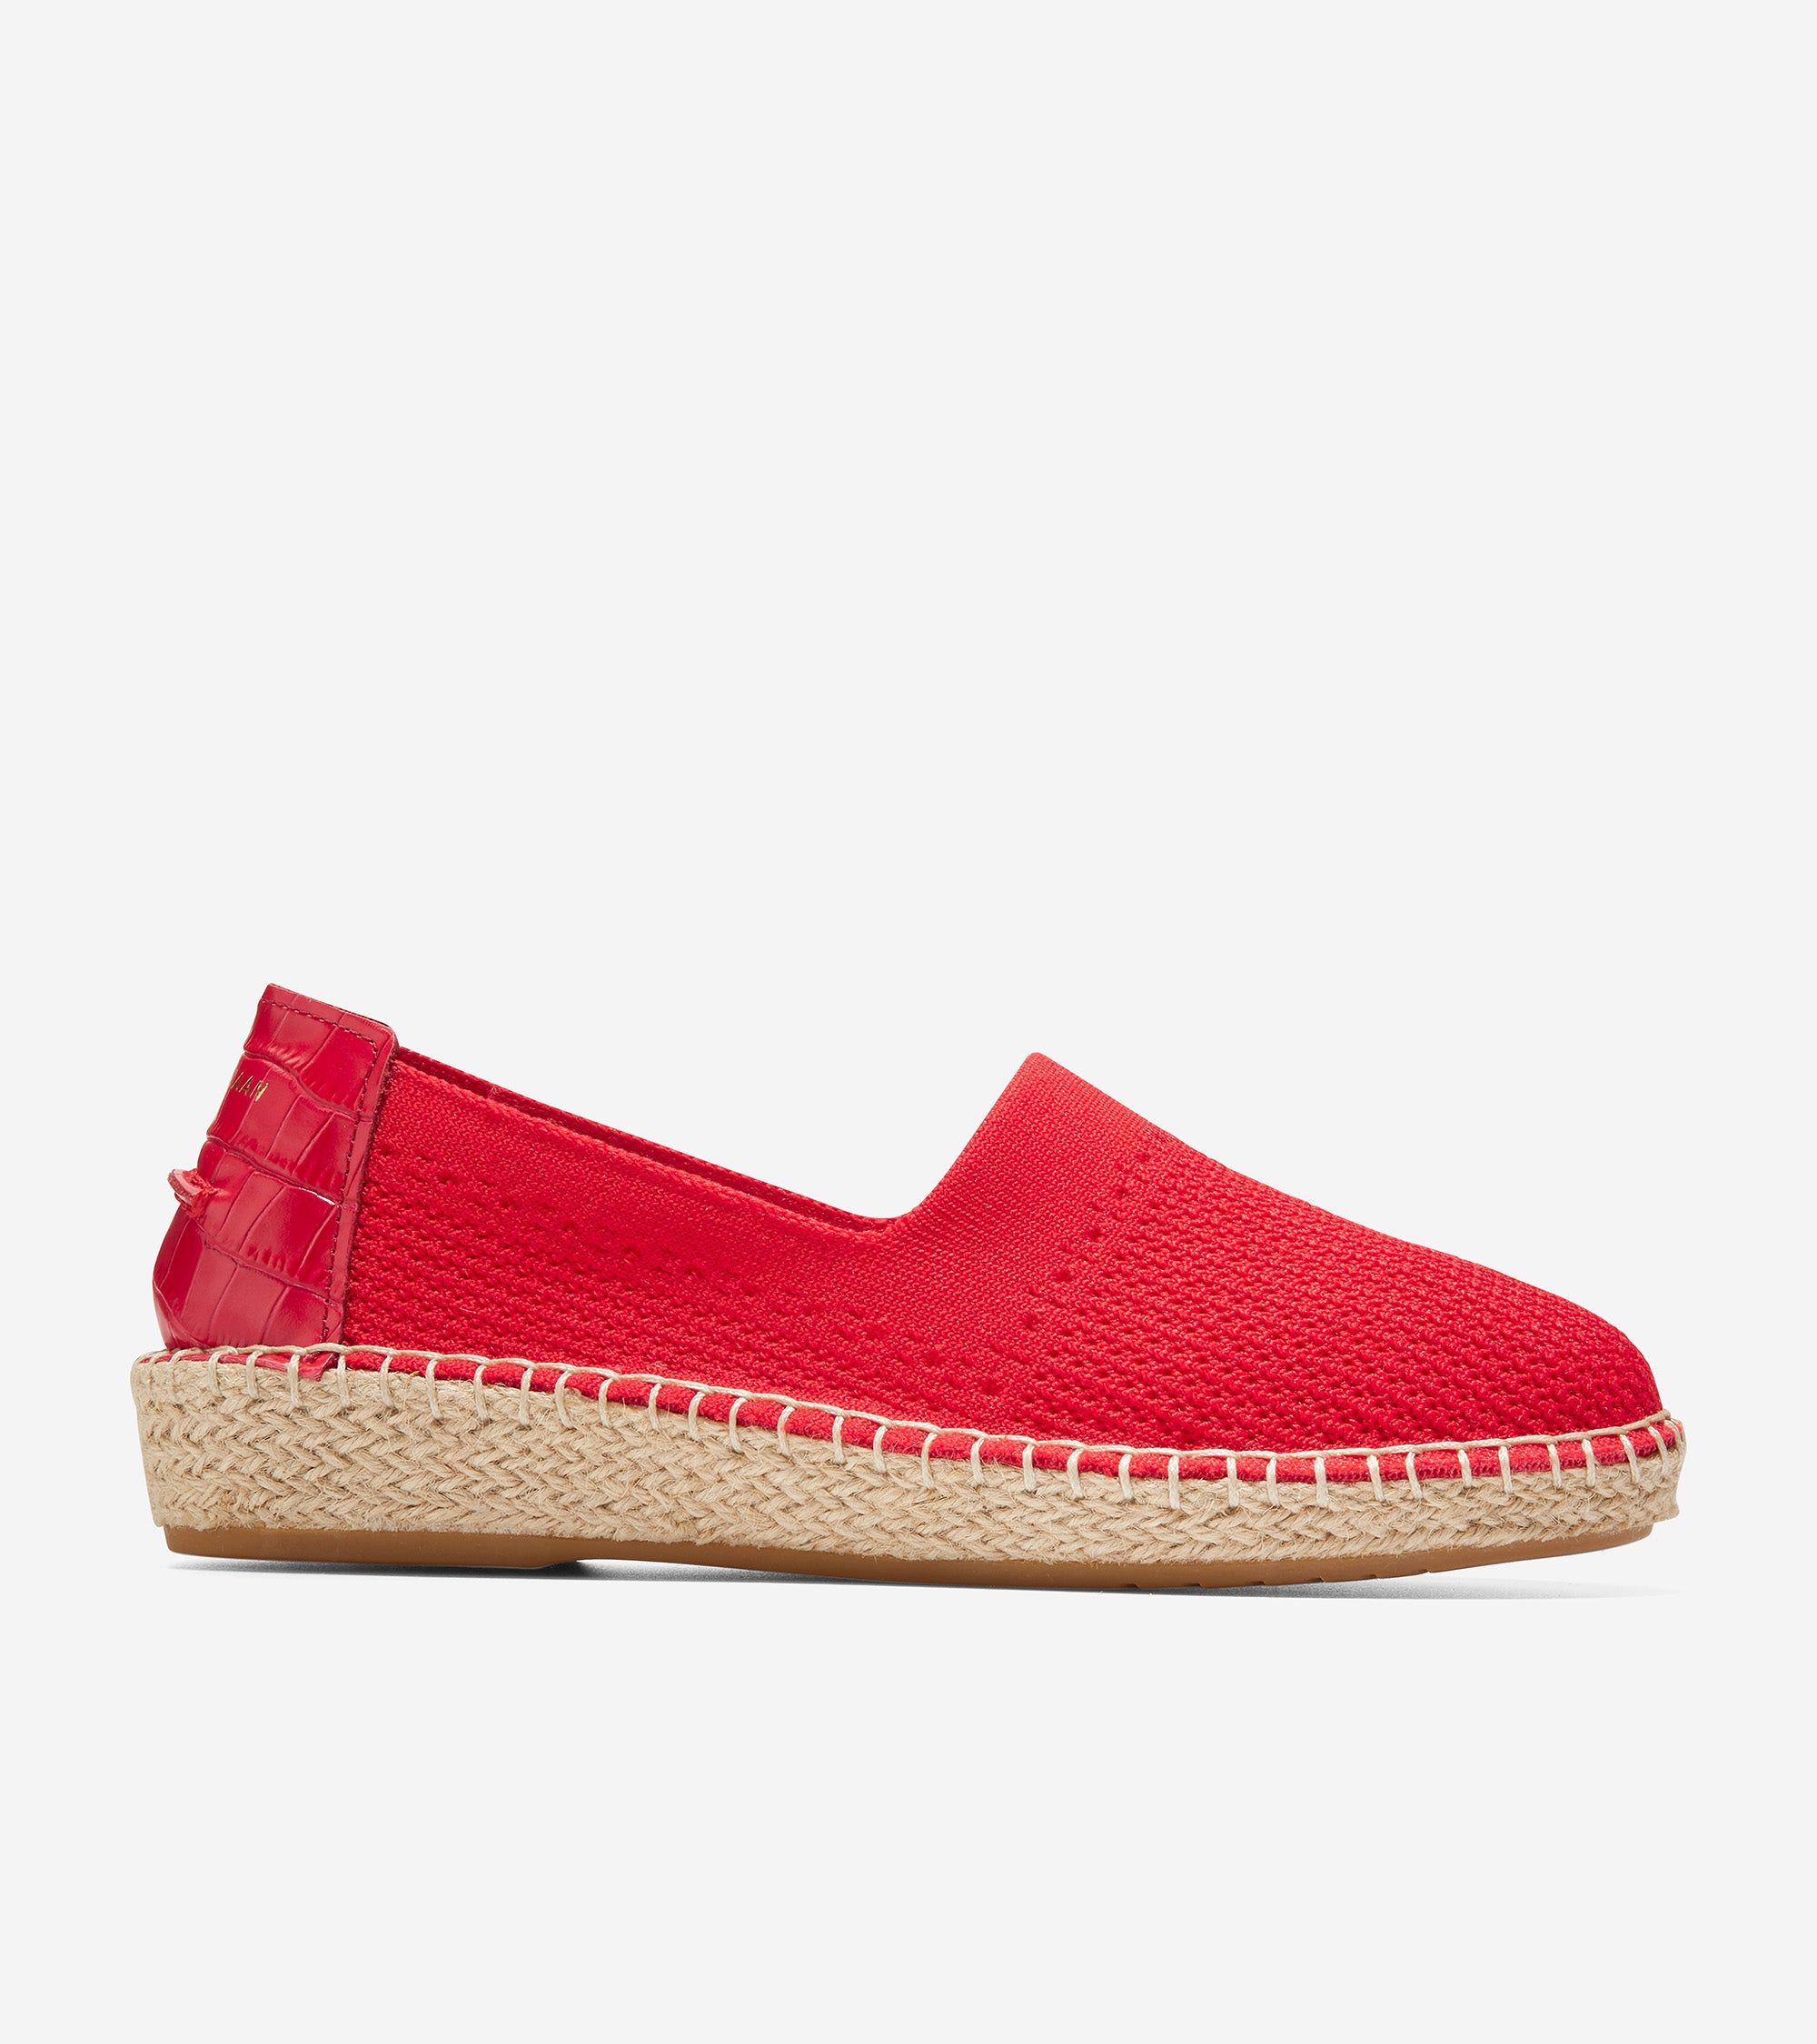 Stylish Red Chambray Espadrille Sneakers - Size 6